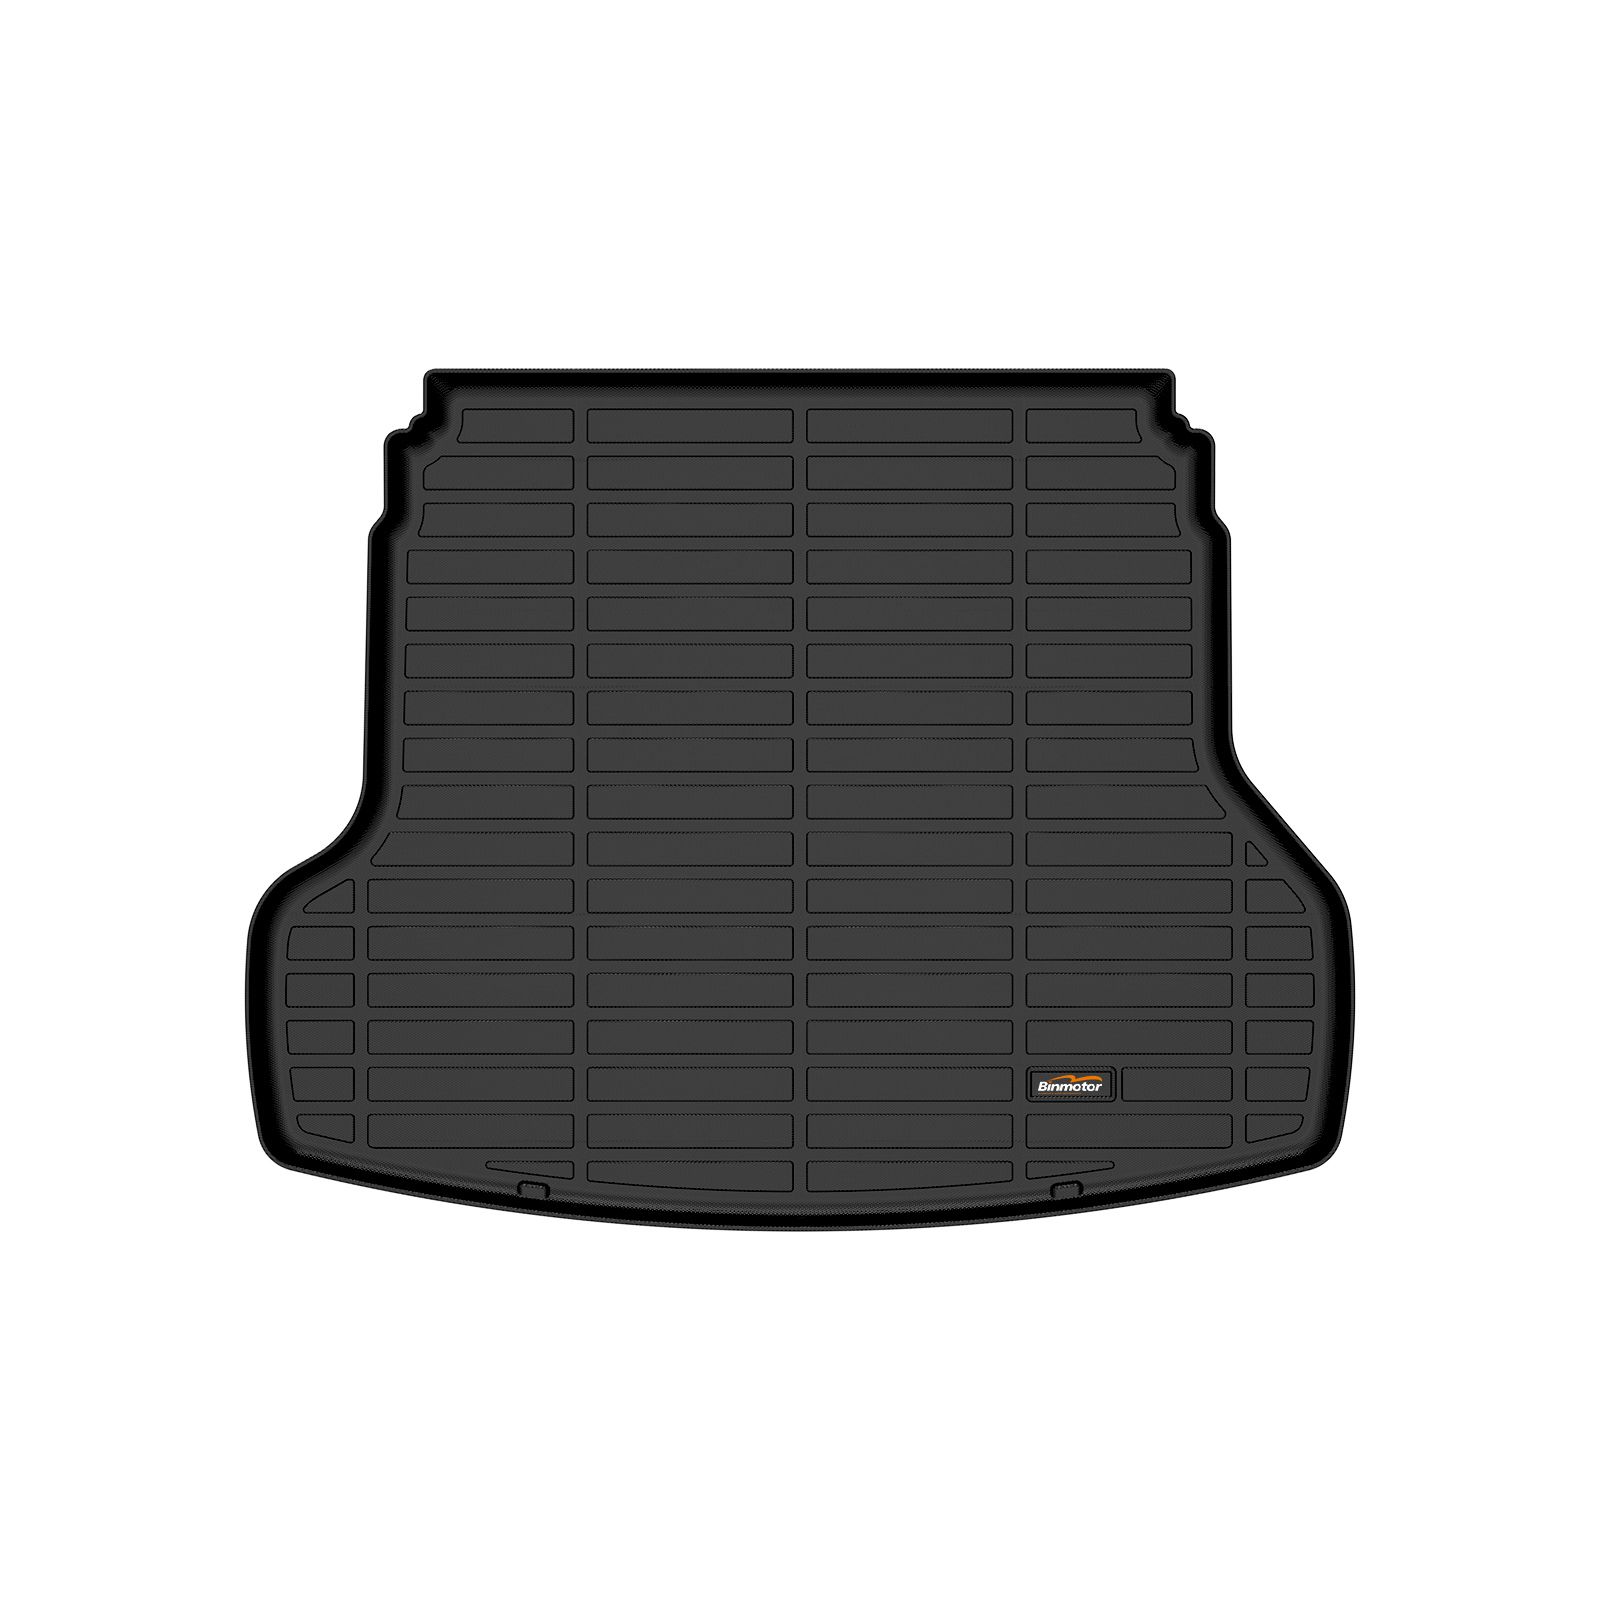 Binmotor-Cargo Liner for Kia Forte, Trunk Mat for Kia Forte, Waterproof Easy to Clean Cargo Mat 2023 Kia Forte Accessories（compatible year 2019-2024）